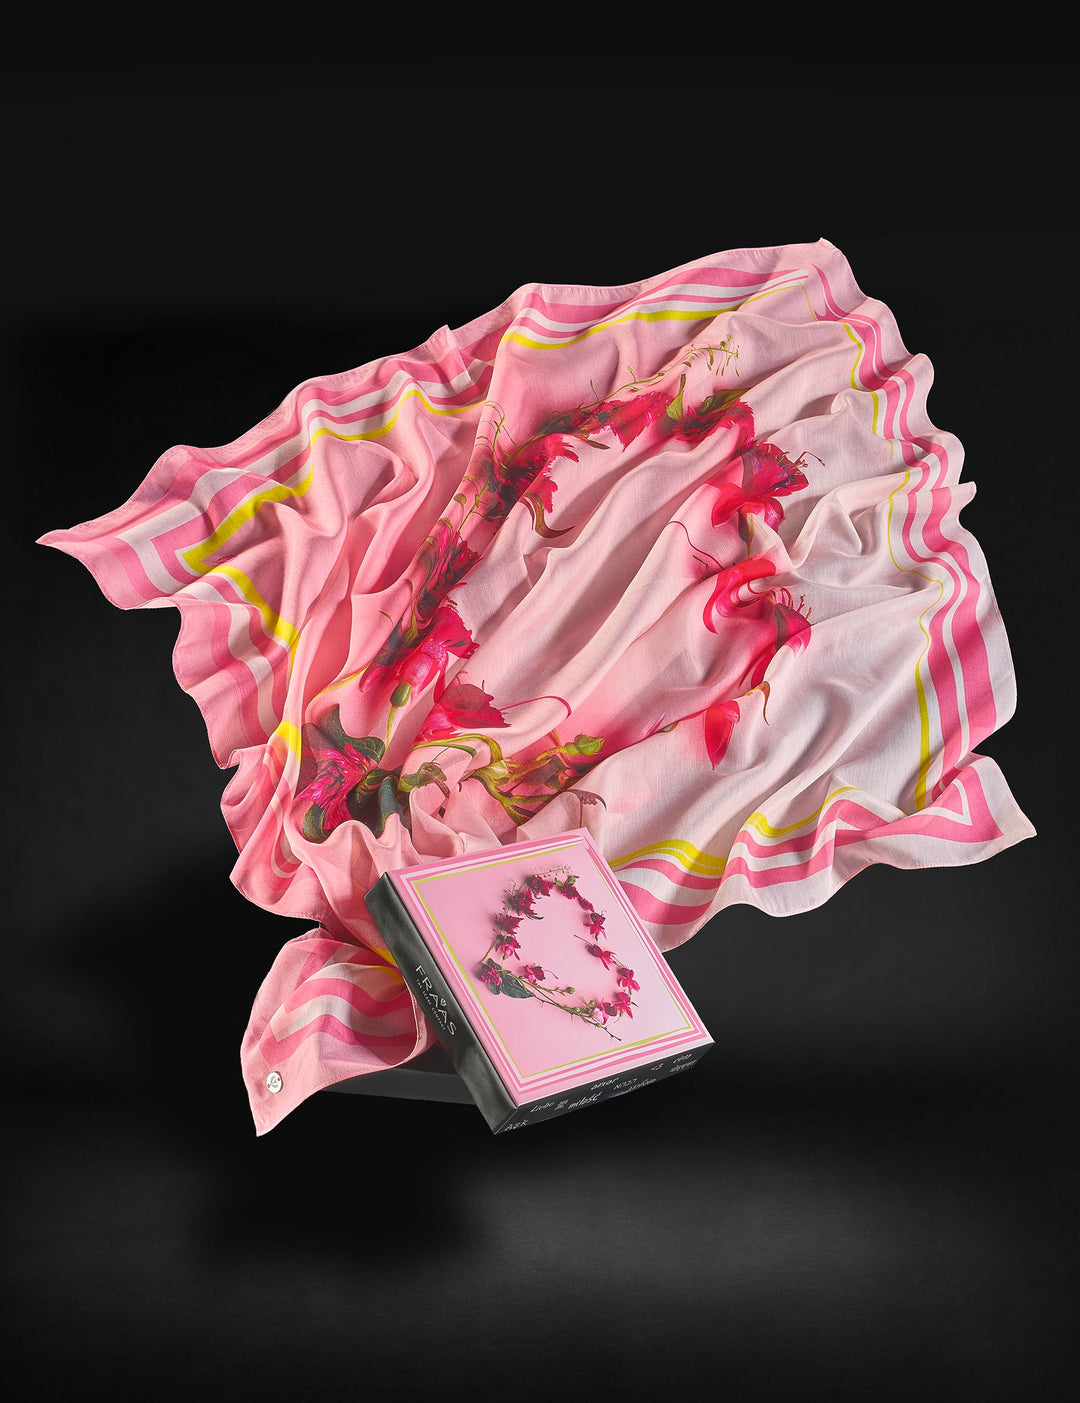 Exquisite gift box] Your back garden silk scarf with scarf buckle